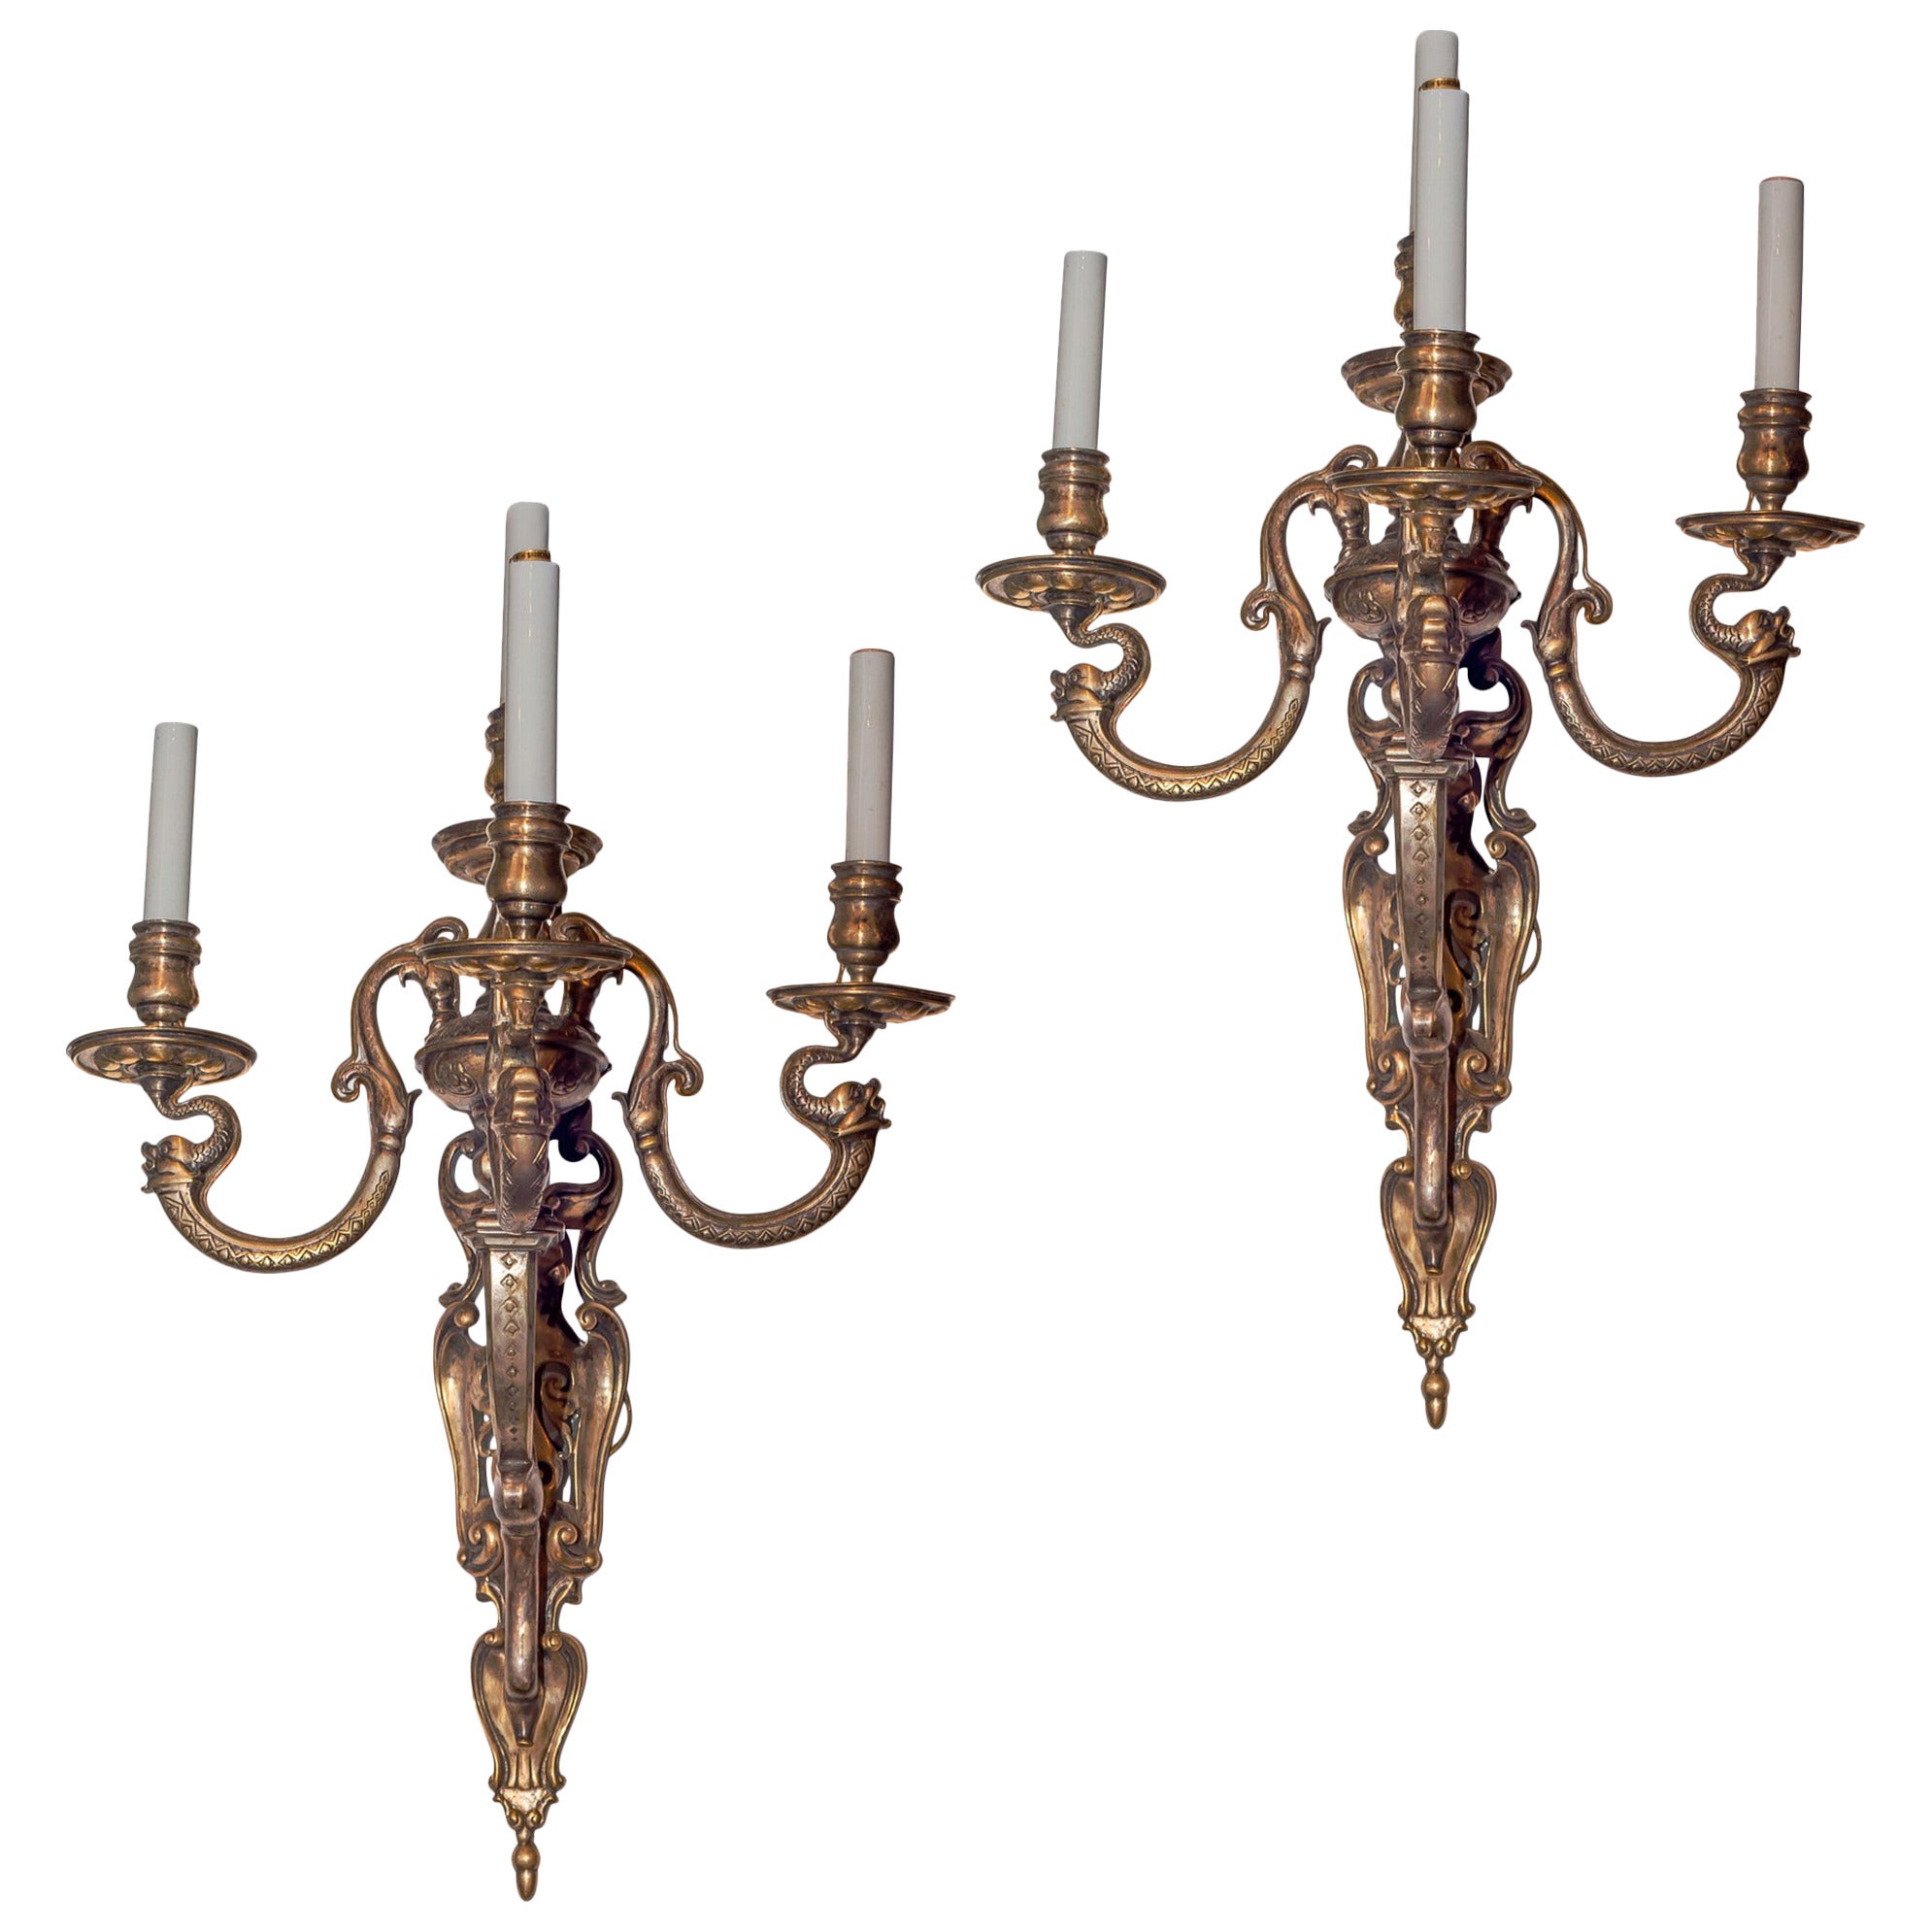 Pair of Antique Silvered Bronze Three-Arm Wall Light Sconces in Moorish Style